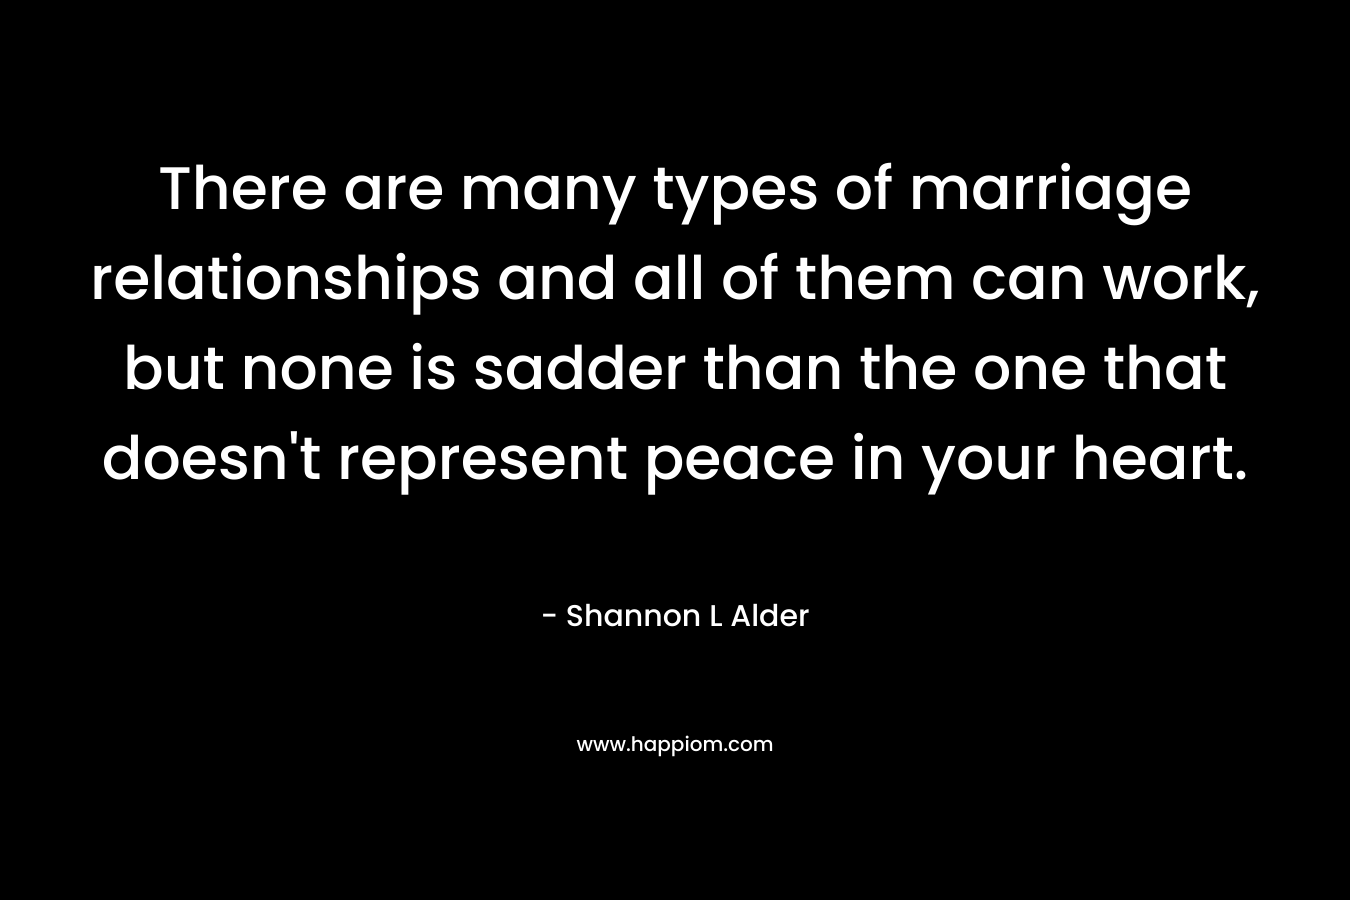 There are many types of marriage relationships and all of them can work, but none is sadder than the one that doesn't represent peace in your heart.